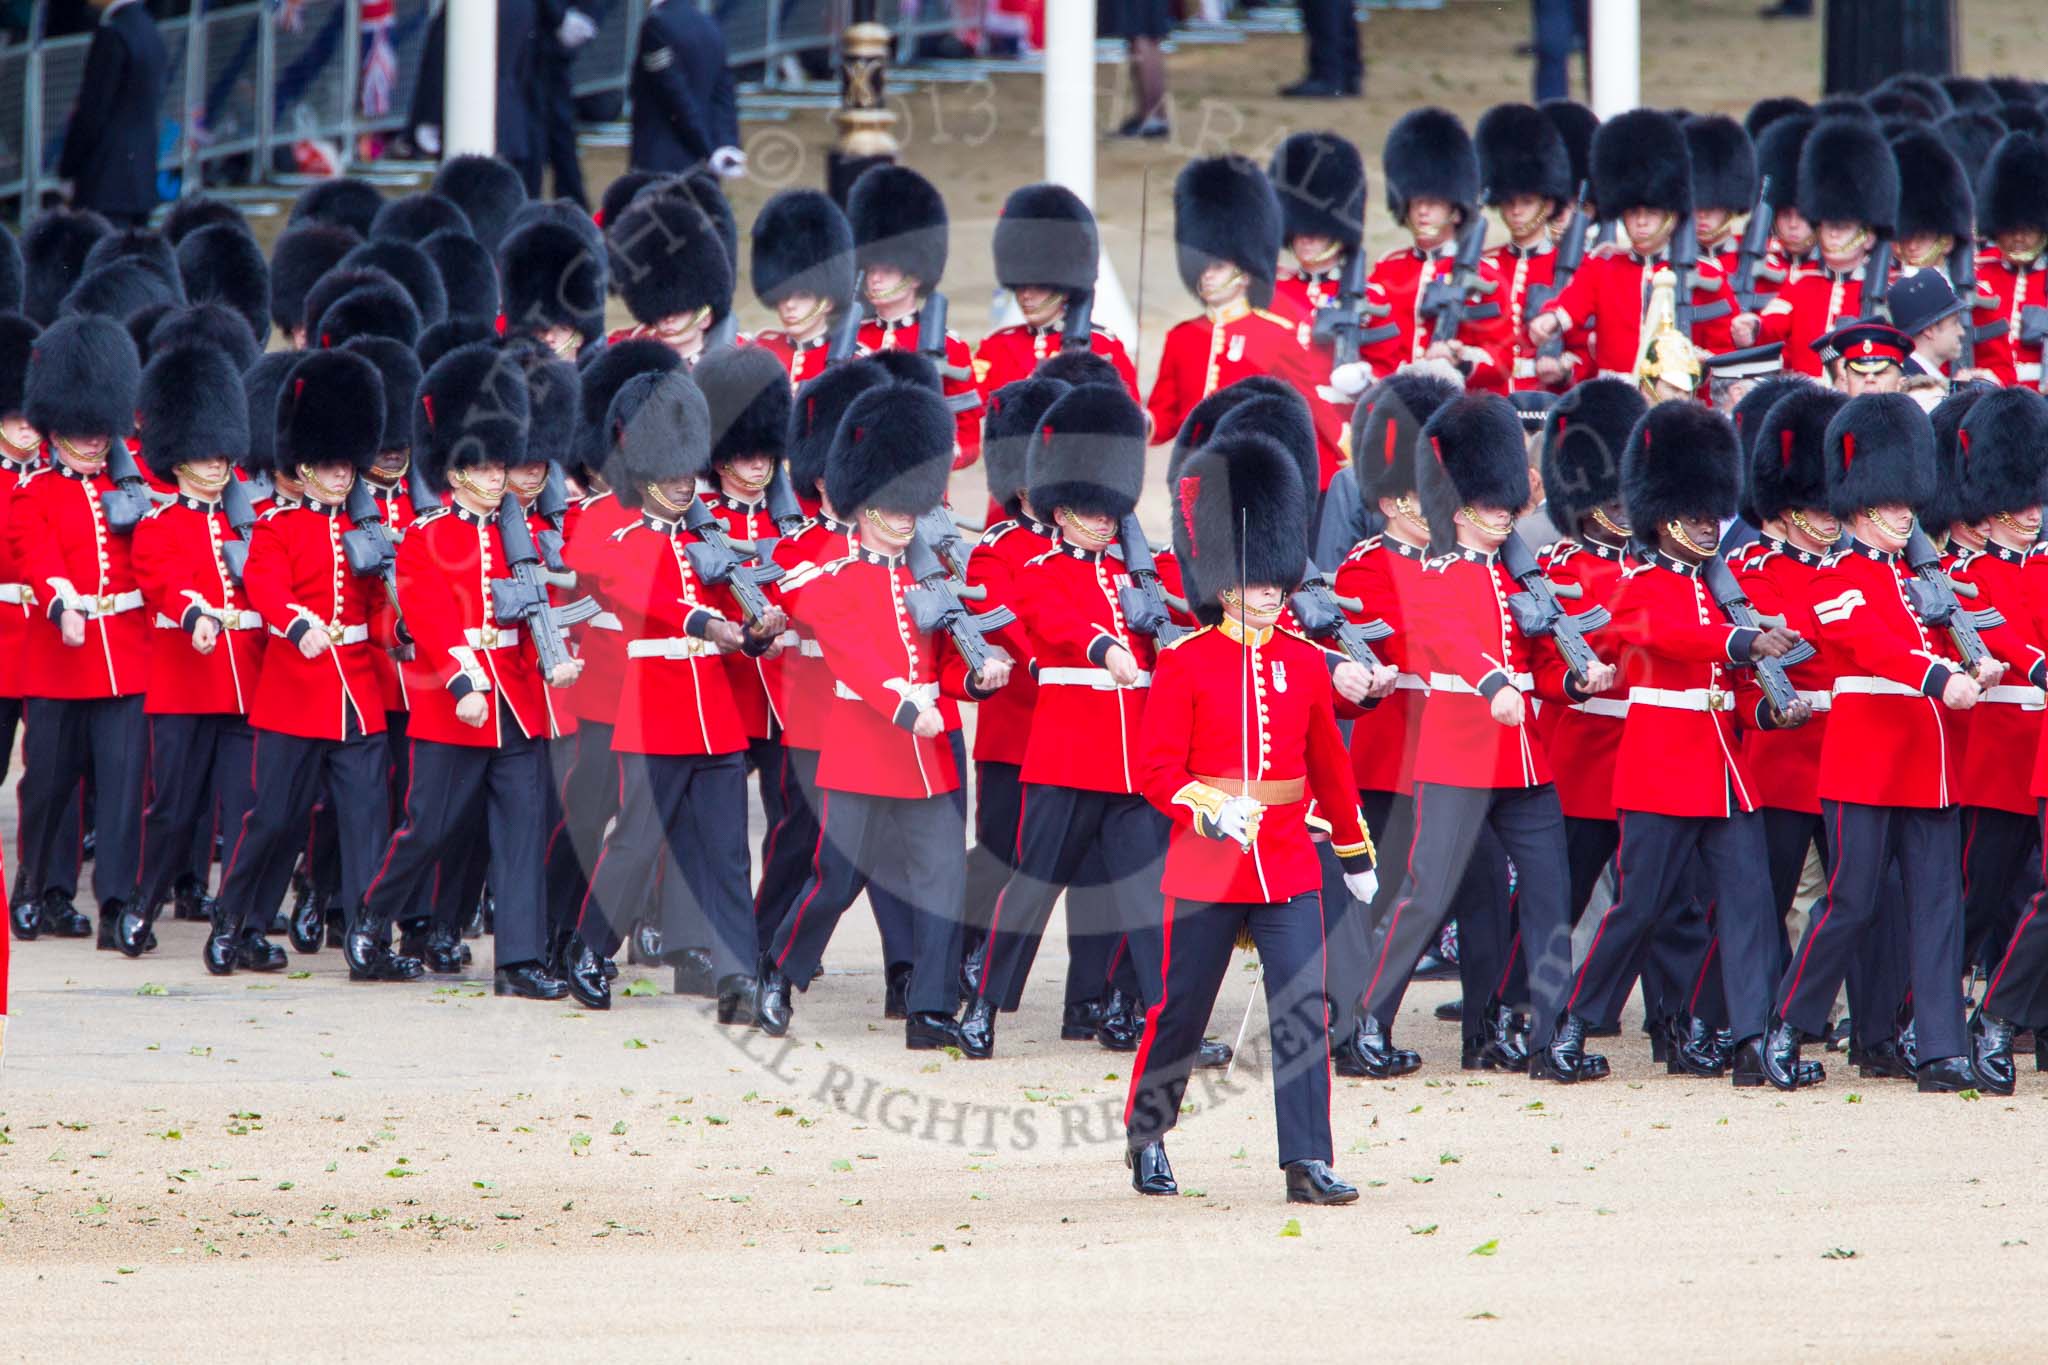 Trooping the Colour 2013: No. 6 Guard, No. 7 Company Coldstream Guards, is immediately followed by No. 5 Guard, F Company Scots Guards. Image #72, 15 June 2013 10:22 Horse Guards Parade, London, UK